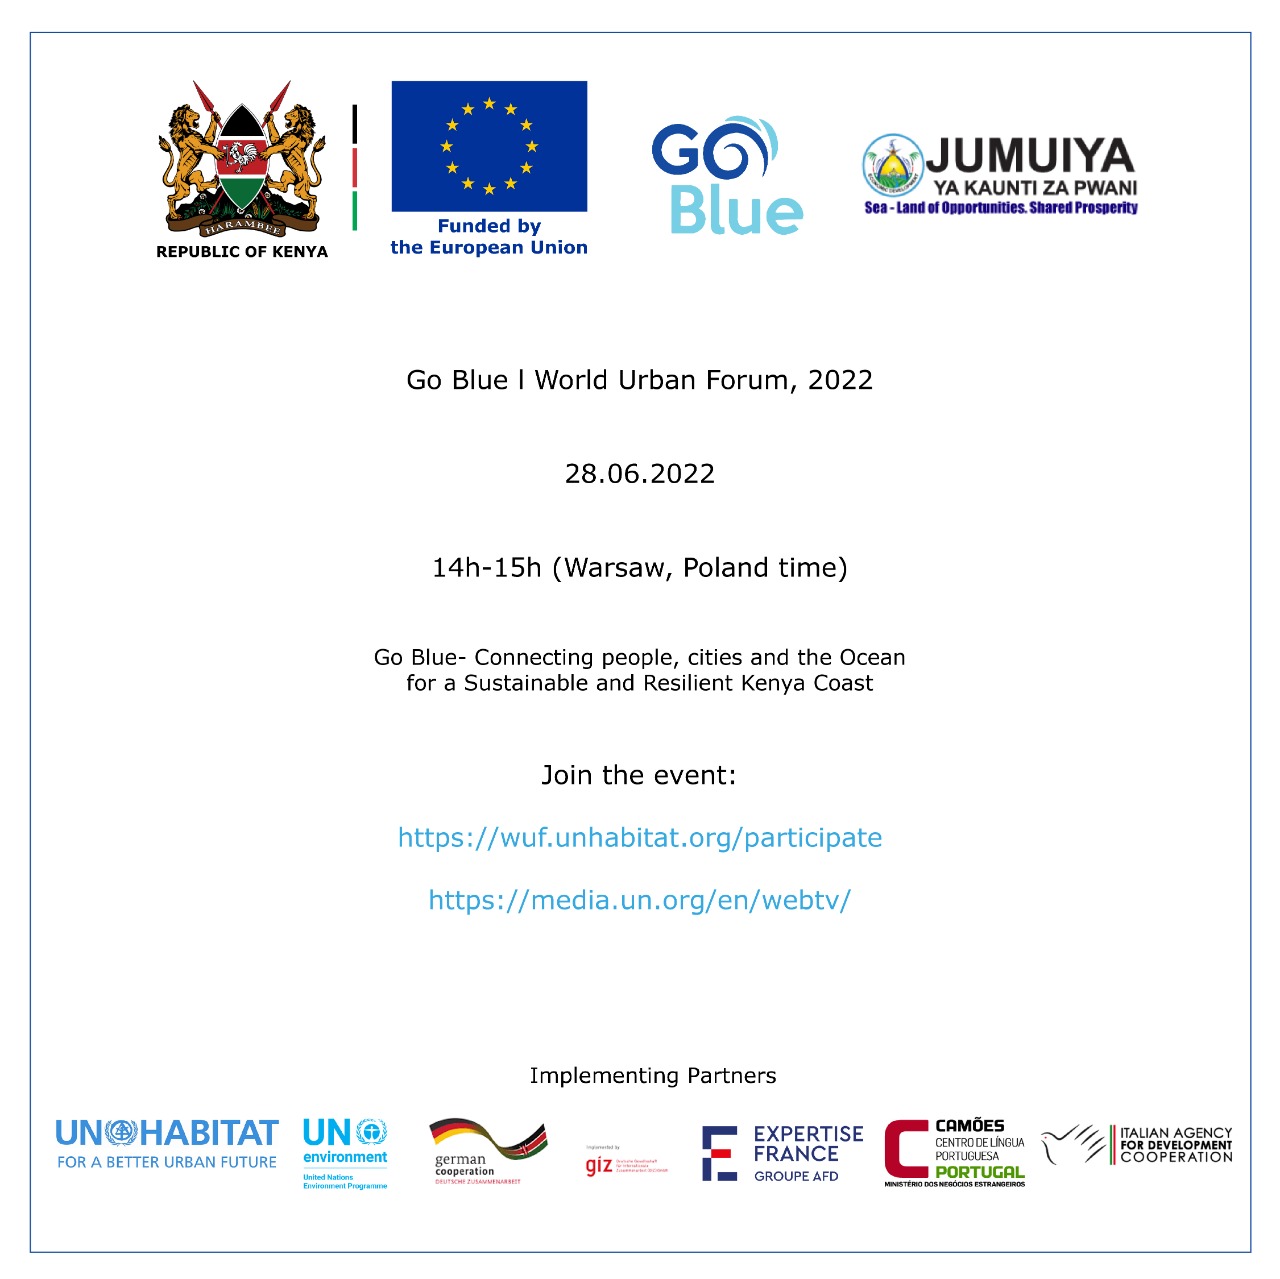 Go Blue- Connecting people, cities and the Ocean for a Sustainable and Resilient Kenya Coast